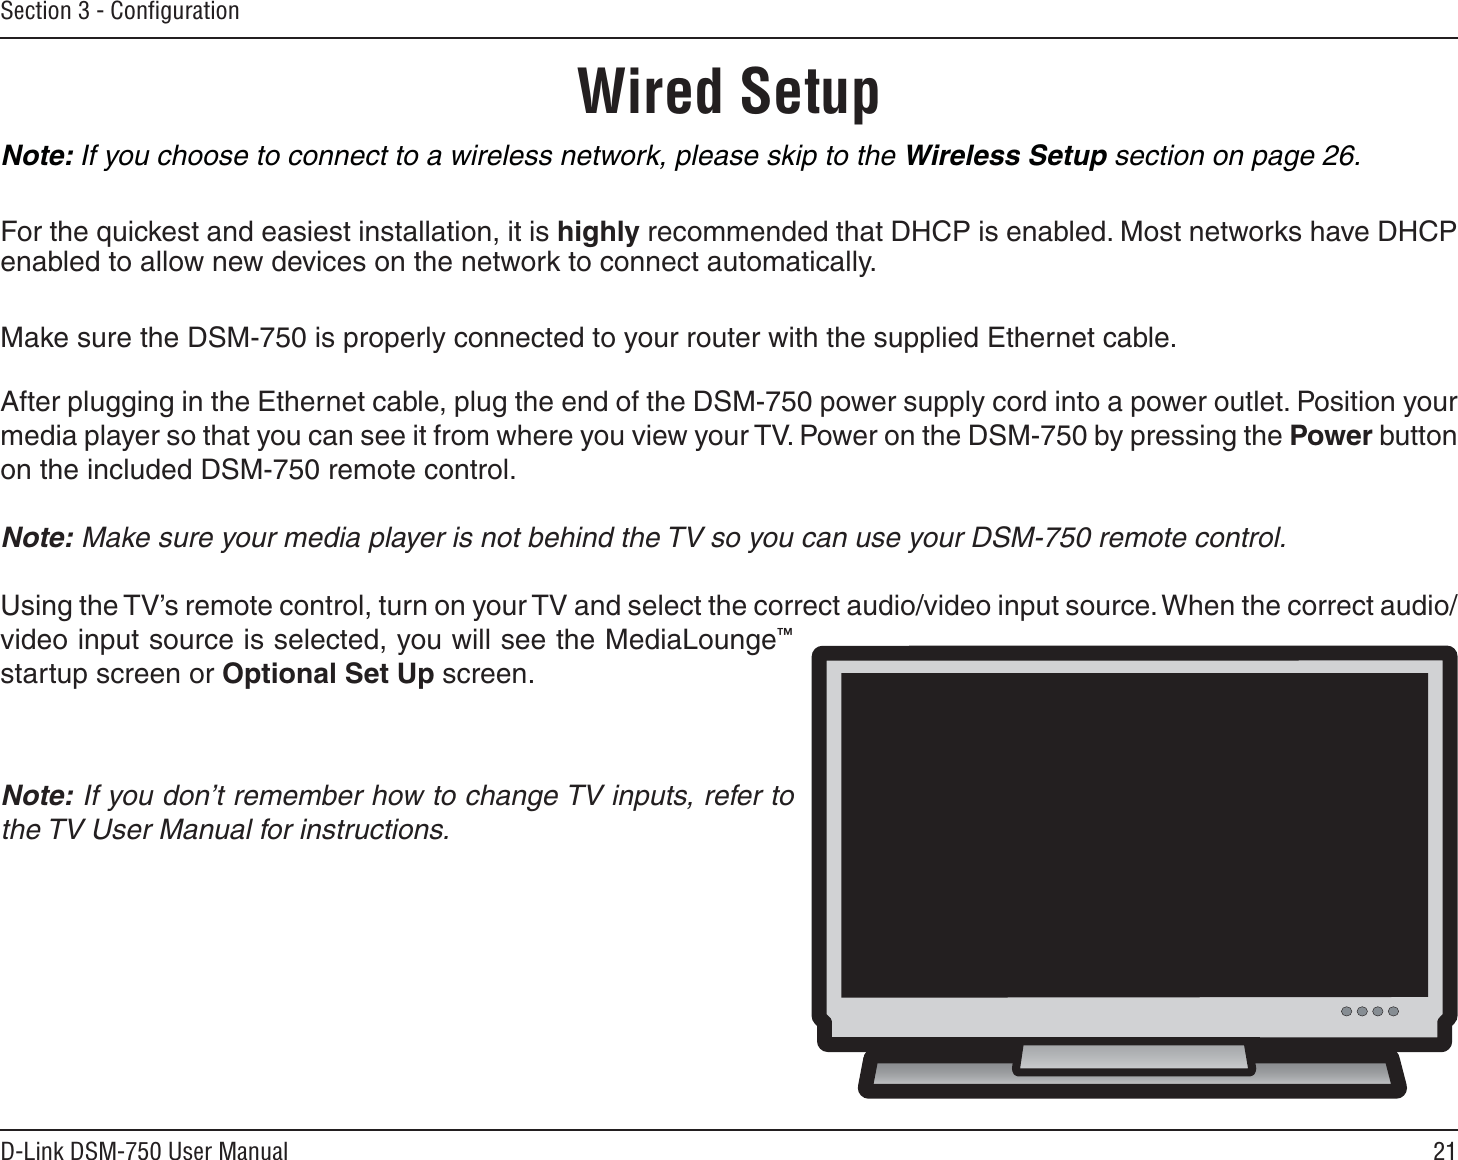 21D-Link DSM-750 User ManualSection 3 - ConﬁgurationWired SetupNote: If you choose to connect to a wireless network, please skip to the Wireless Setup section on page 26. For the quickest and easiest installation, it is highly recommended that DHCP is enabled. Most networks have DHCP enabled to allow new devices on the network to connect automatically.Make sure the DSM-750 is properly connected to your router with the supplied Ethernet cable.After plugging in the Ethernet cable, plug the end of the DSM-750 power supply cord into a power outlet. Position your media player so that you can see it from where you view your TV. Power on the DSM-750 by pressing the Power button on the included DSM-750 remote control.Note: Make sure your media player is not behind the TV so you can use your DSM-750 remote control.Using the TV’s remote control, turn on your TV and select the correct audio/video input source. When the correct audio/video input source is selected, you will see the MediaLounge™startup screen or Optional Set Up screen.Note: If you don’t remember how to change TV inputs, refer to the TV User Manual for instructions.